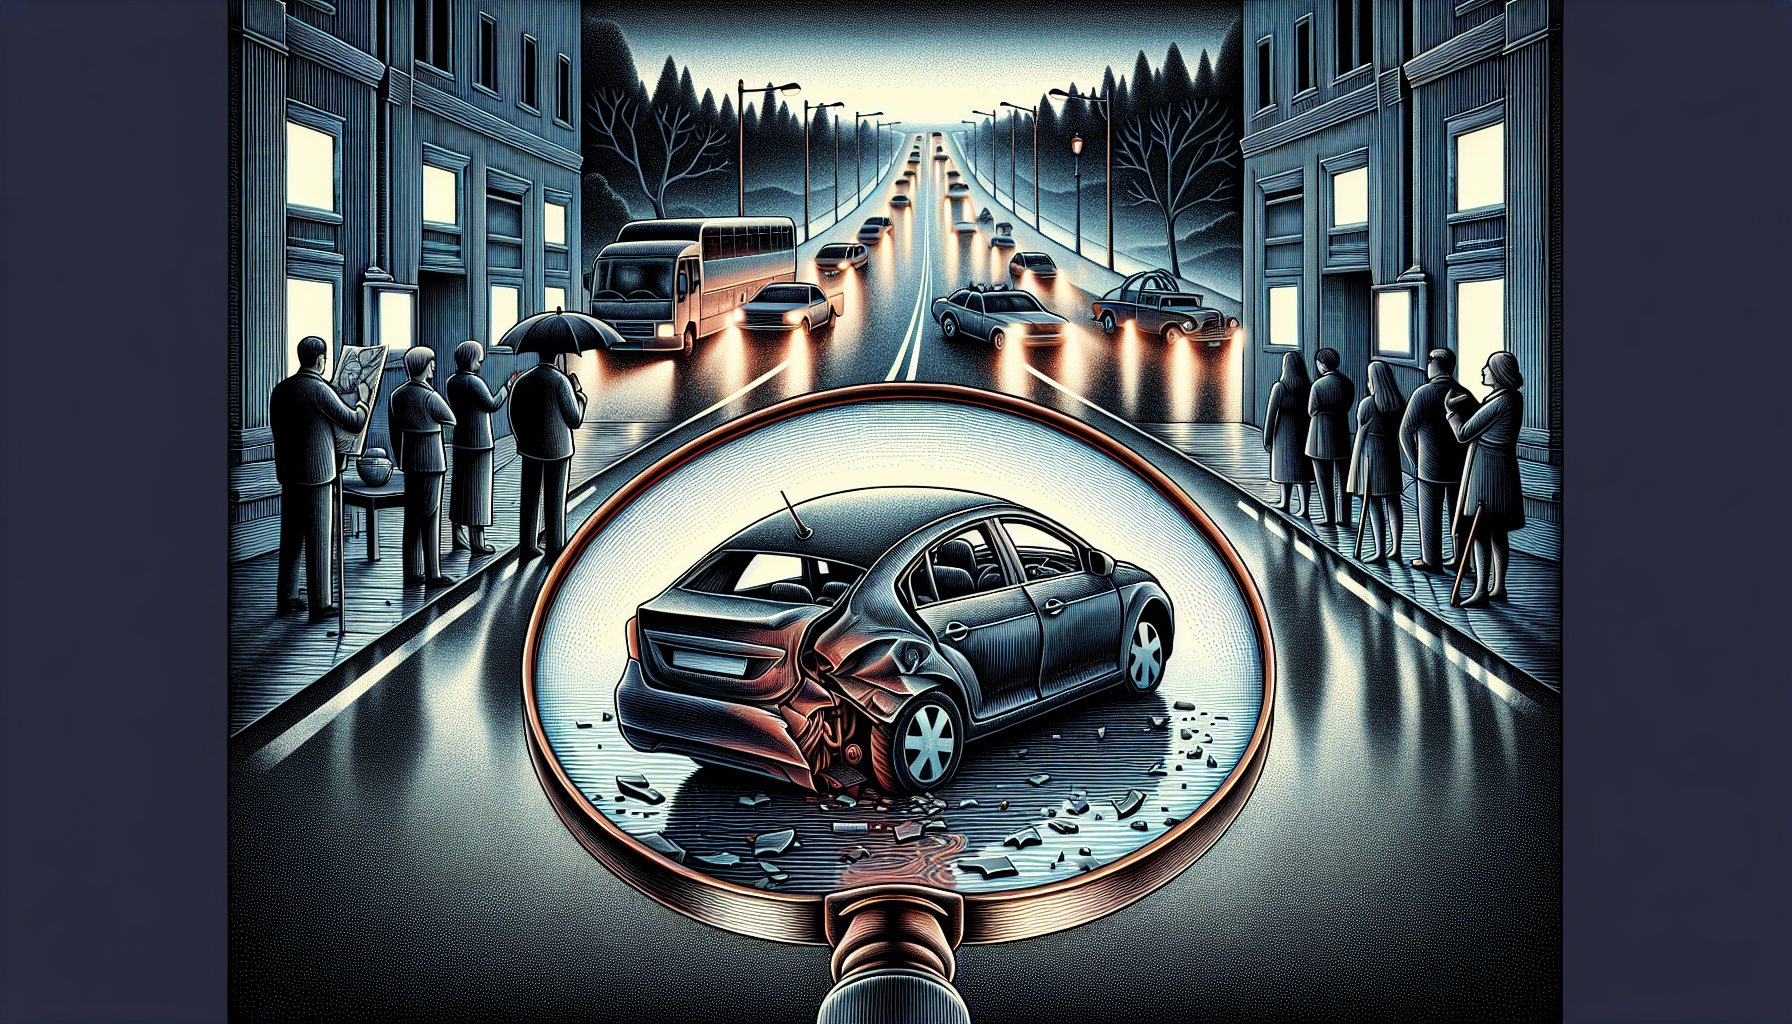 Illustration of a hit-and-run accident scene